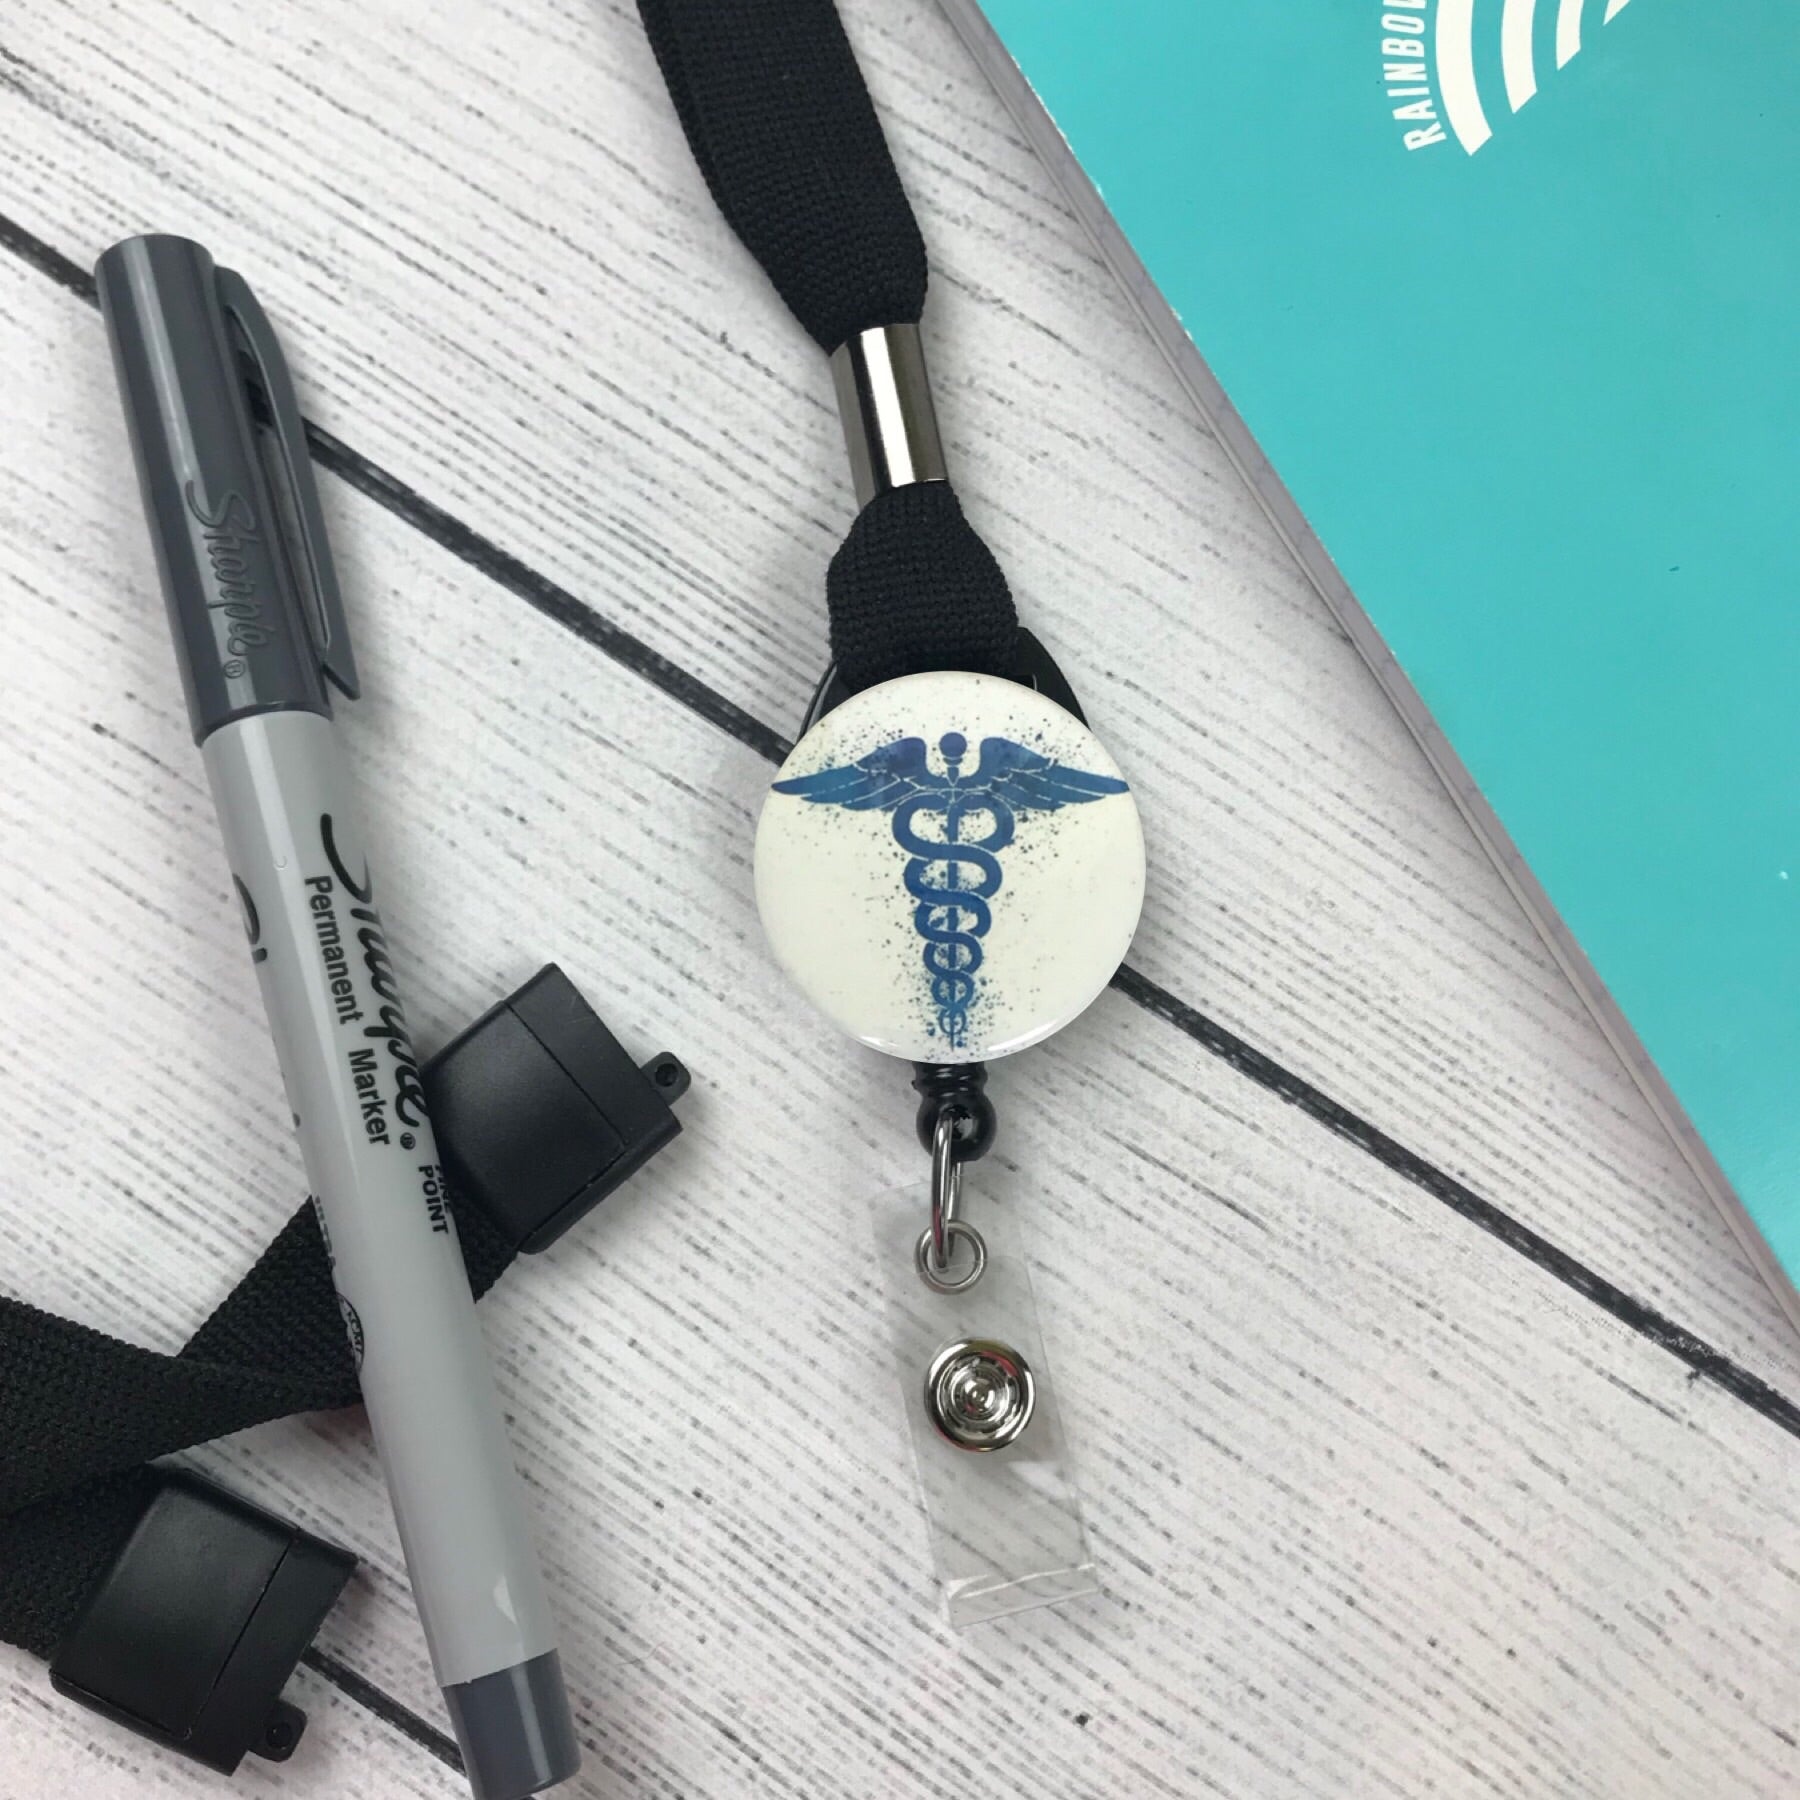 White Badge Reel with Pen & Permanent Marker – 